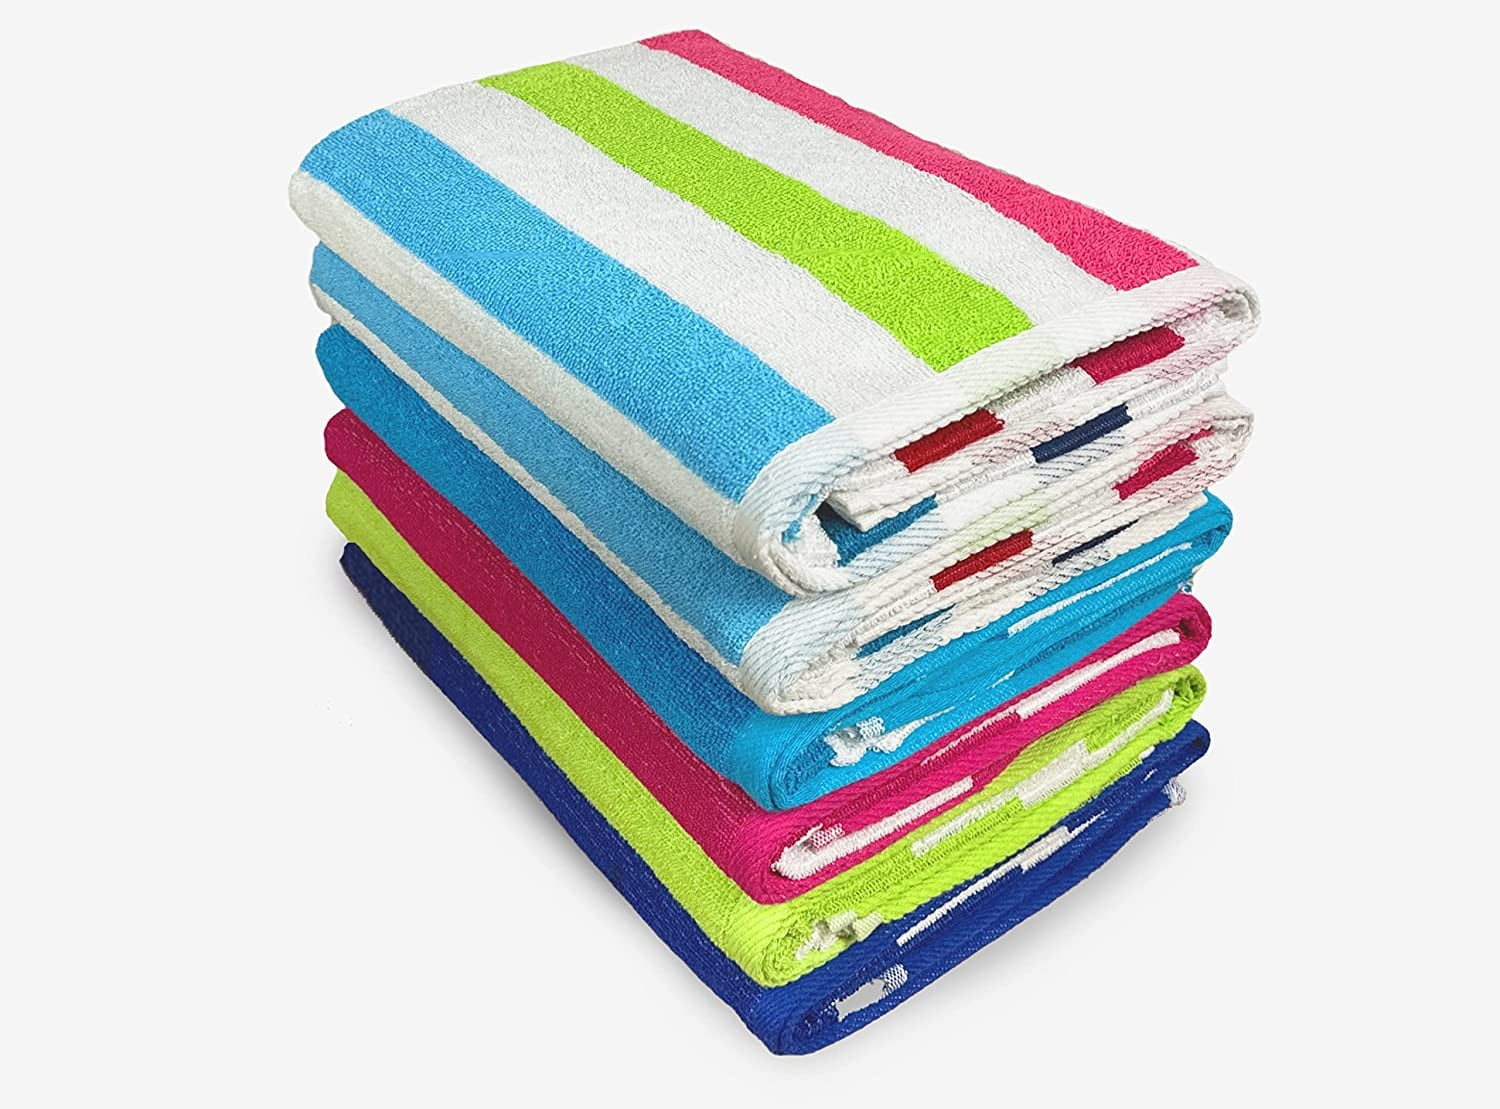  LANE LINEN 100% Cotton Beach Towel, Pack of 4 Beach Towels Set,  Cabana Stripe Pool Towels, Oversized Beach Towels for Adults (30 x 60”),  Highly Absorbent, Large Beach Towels, Quick Dry